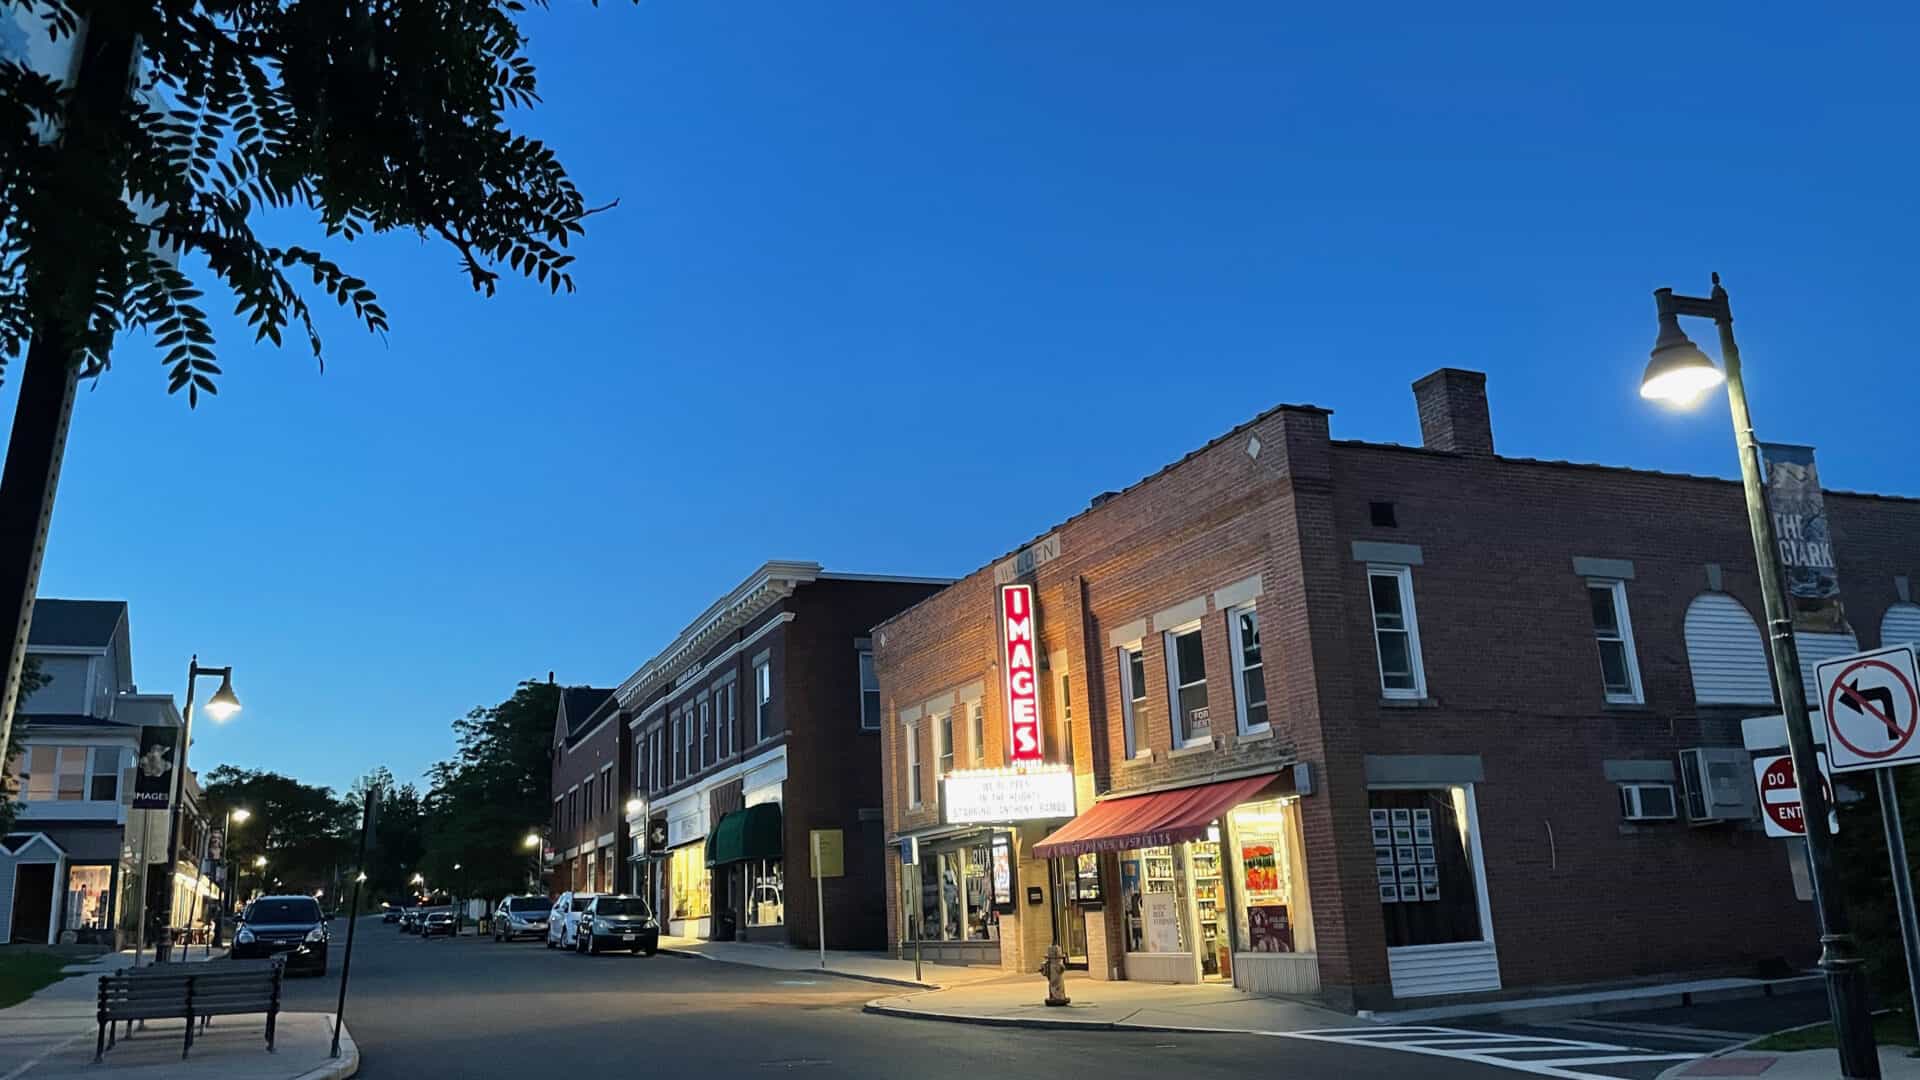 Images Cinema glows at dusk on Spring Street in Williamstown.